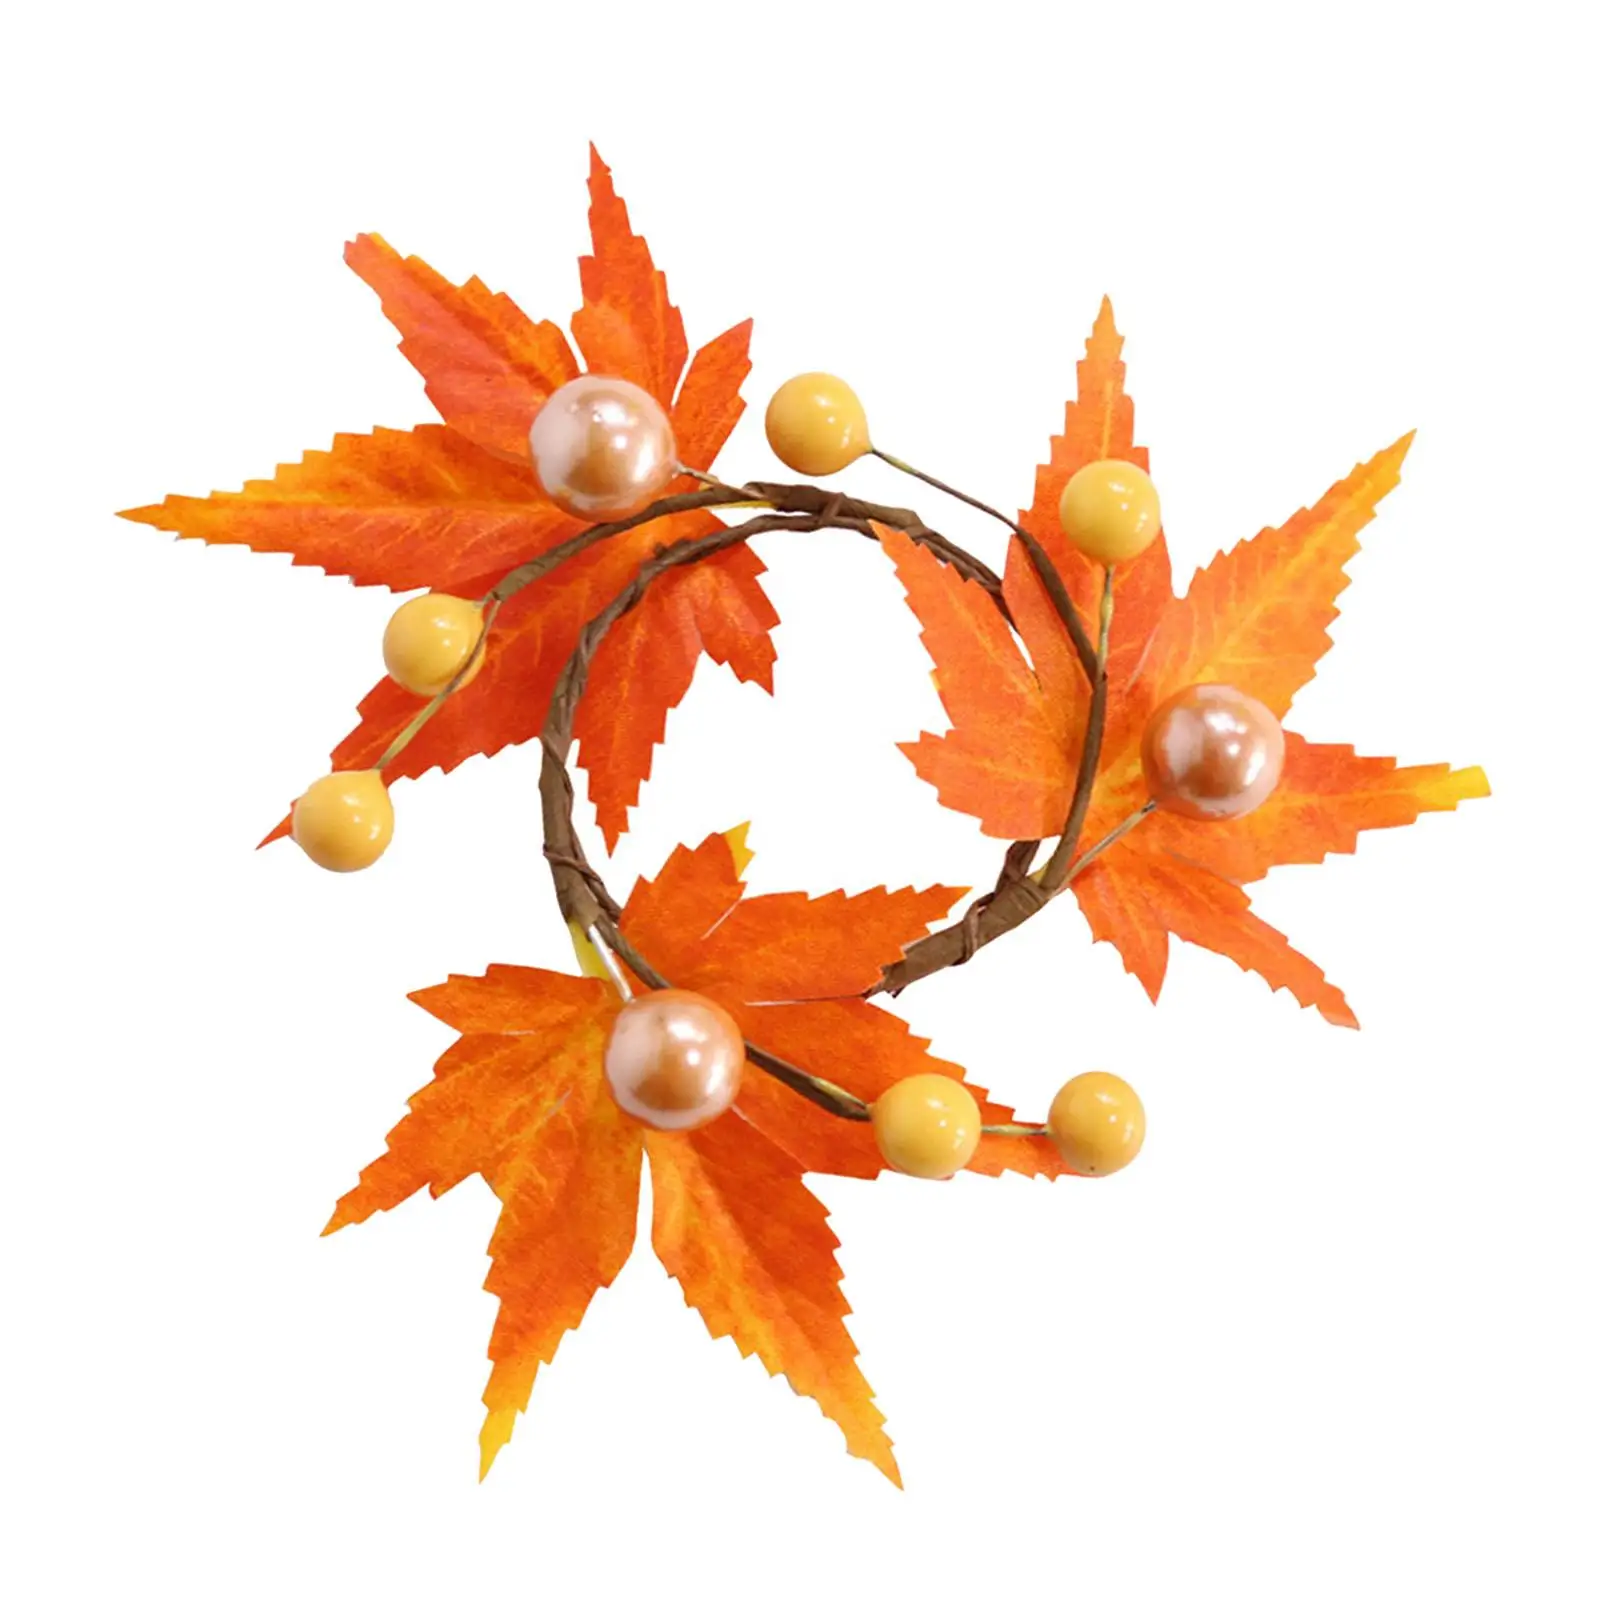 Maple Napkin Ring Accessories Centerpieces Crafts Orange Harvest for Dining Table Festival Holiday Farmhouse Halloween